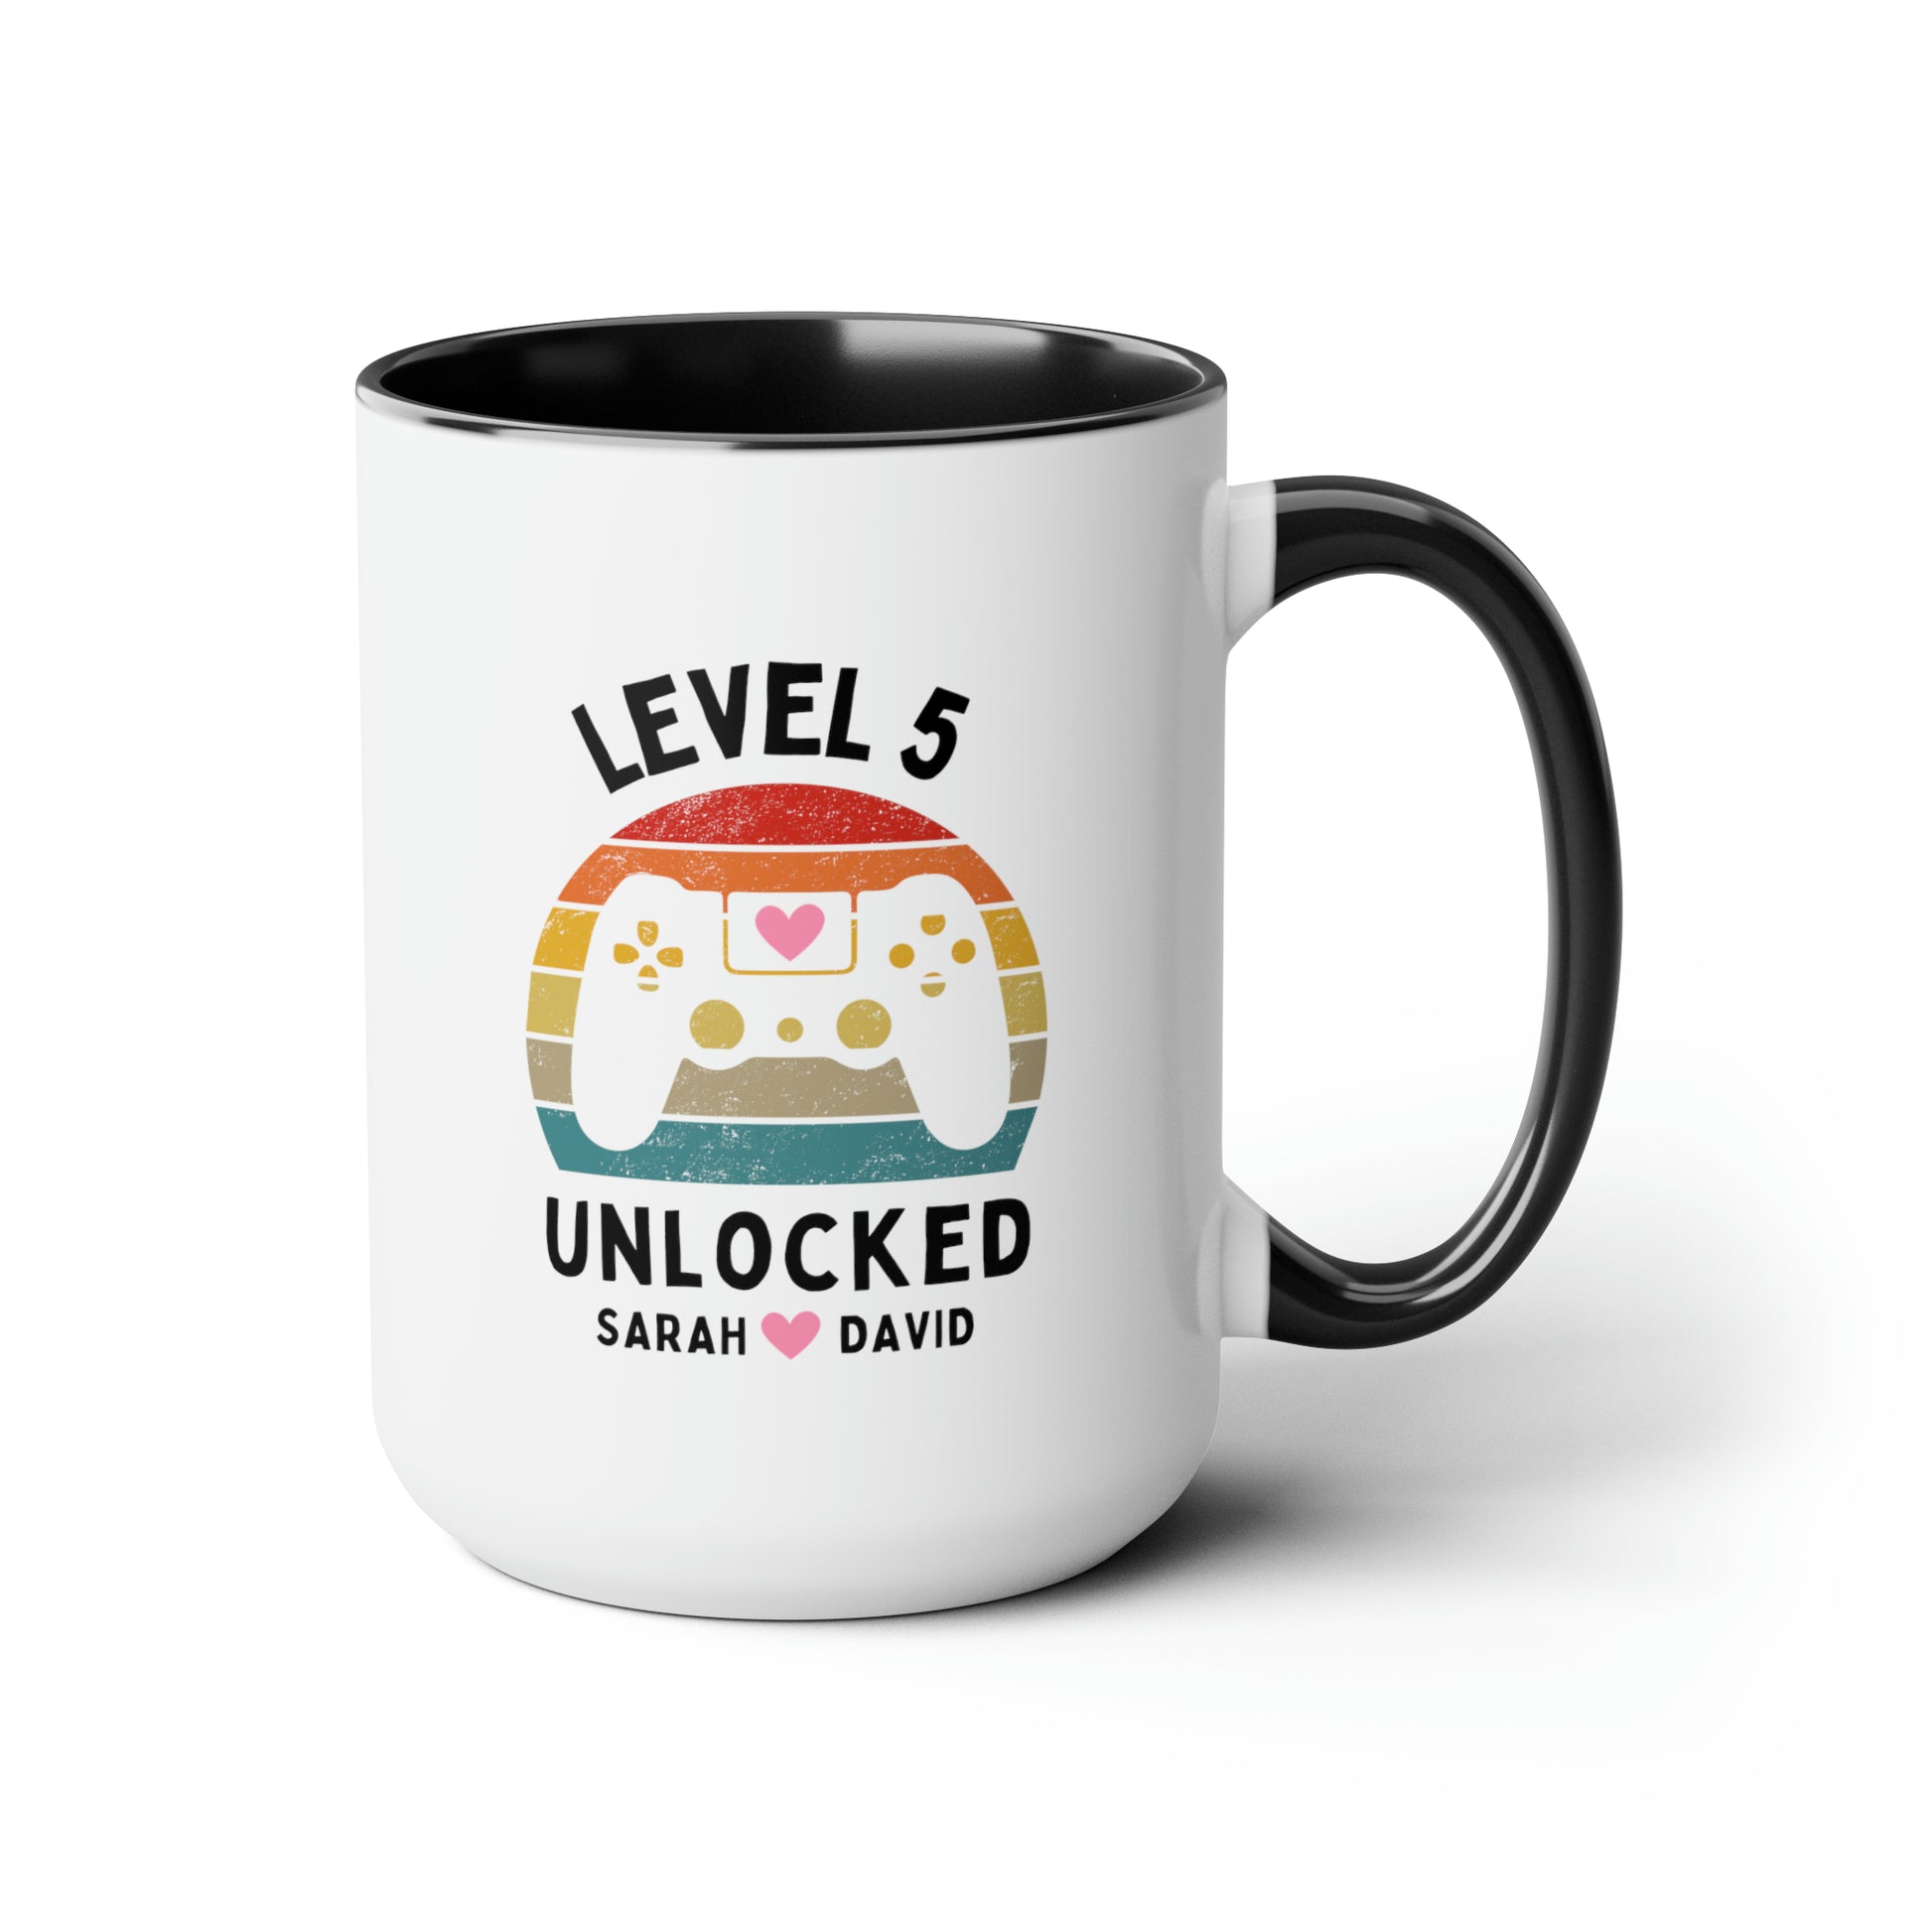 Level Unlocked 15oz white with black accent funny large coffee mug gift for husband wife wedding anniversary retro video game gamer custom date personalize customize waveywares wavey wares wavywares wavy wares